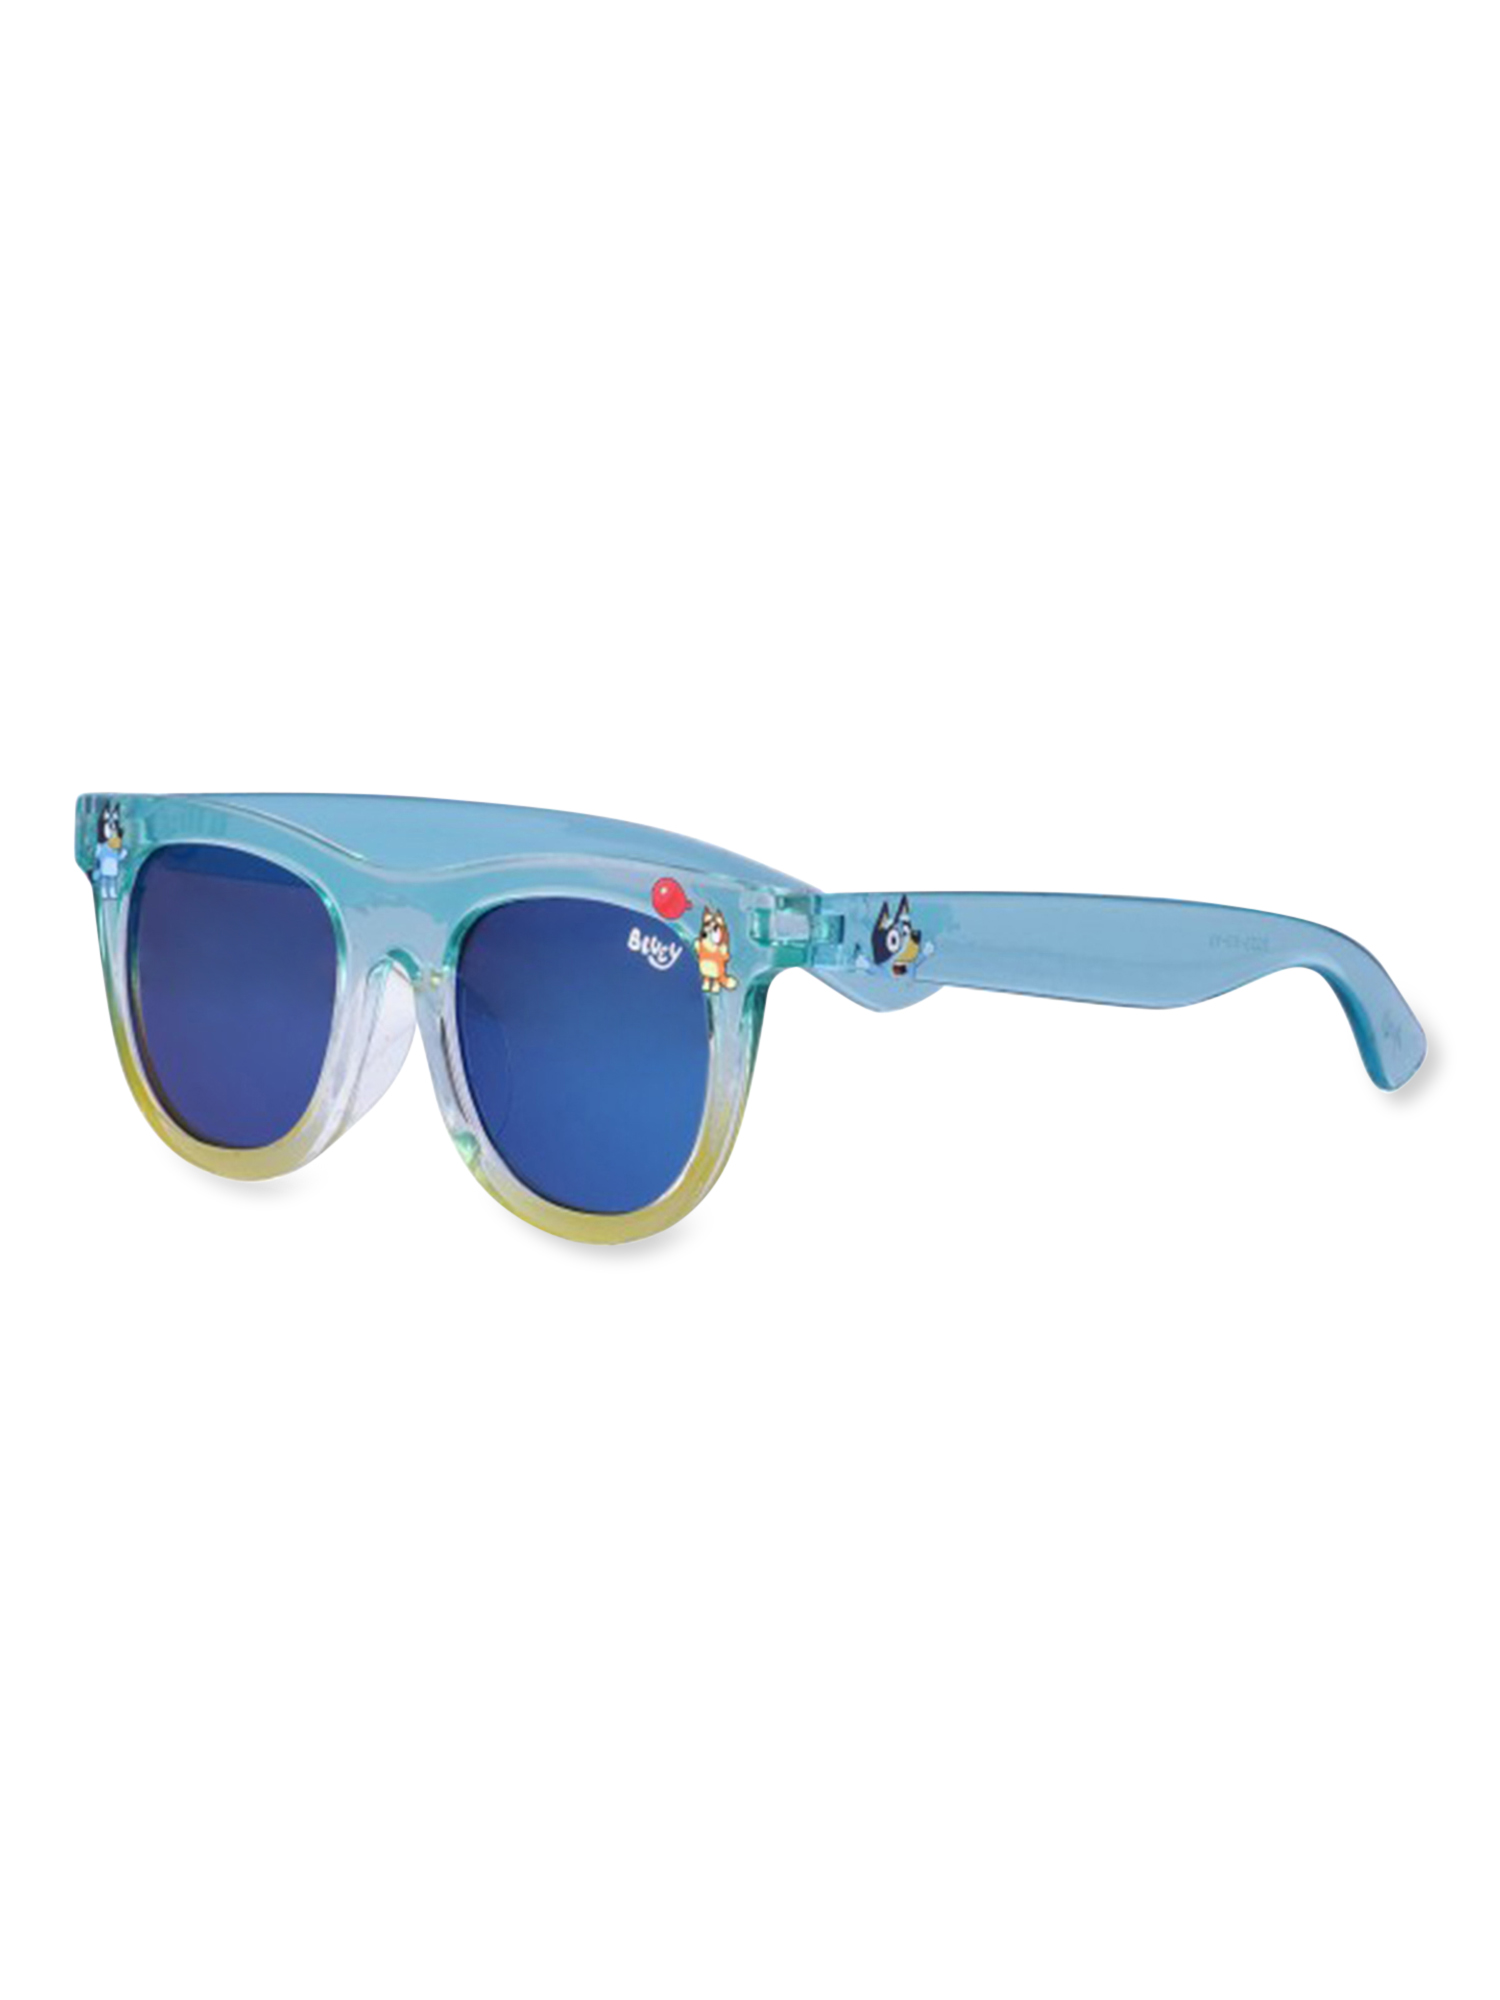 Bluey Kids Classic Sunglasses with UV Protection Blue - image 3 of 4